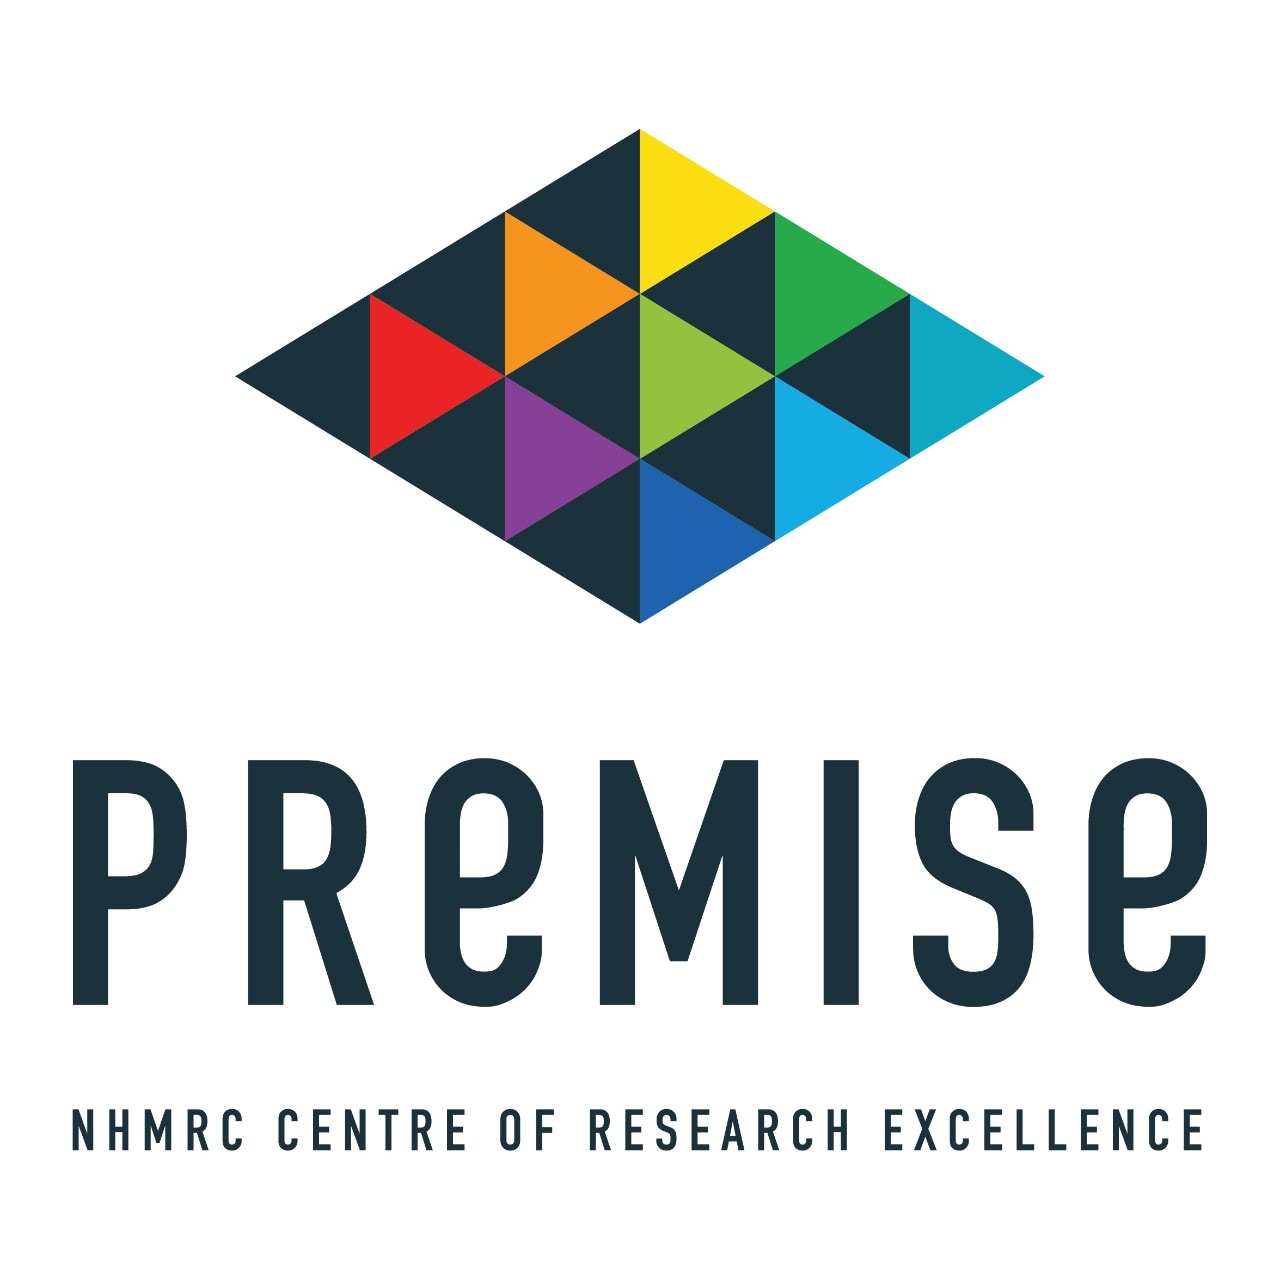 PREMISE NHMRC Centre of Research Excellence